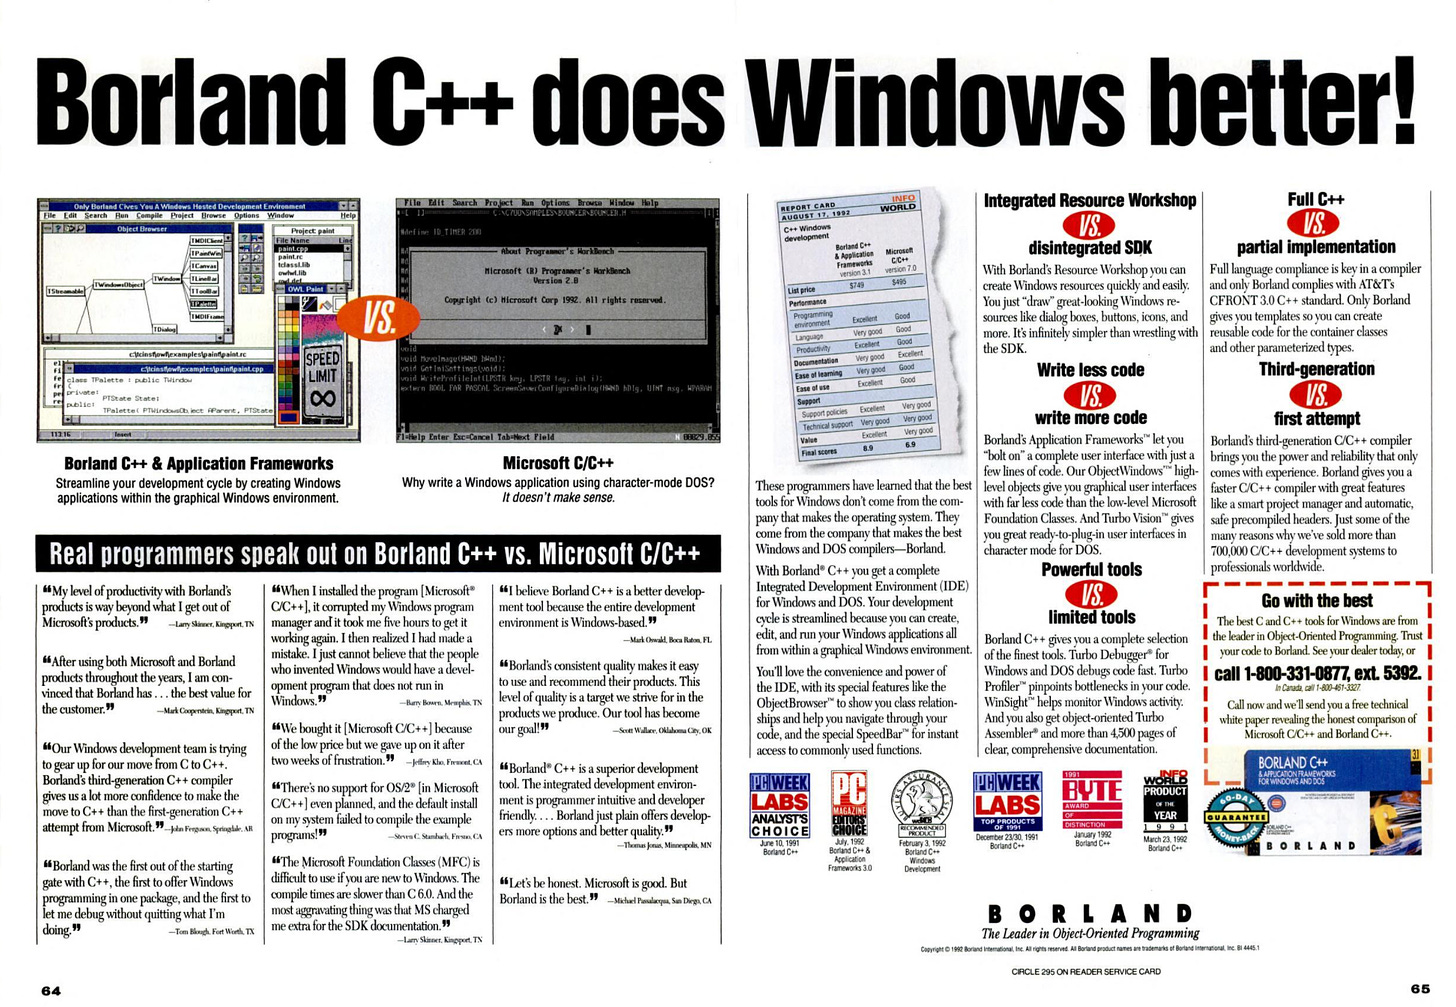 Two page advertisement: Borland C++ does Windows better.